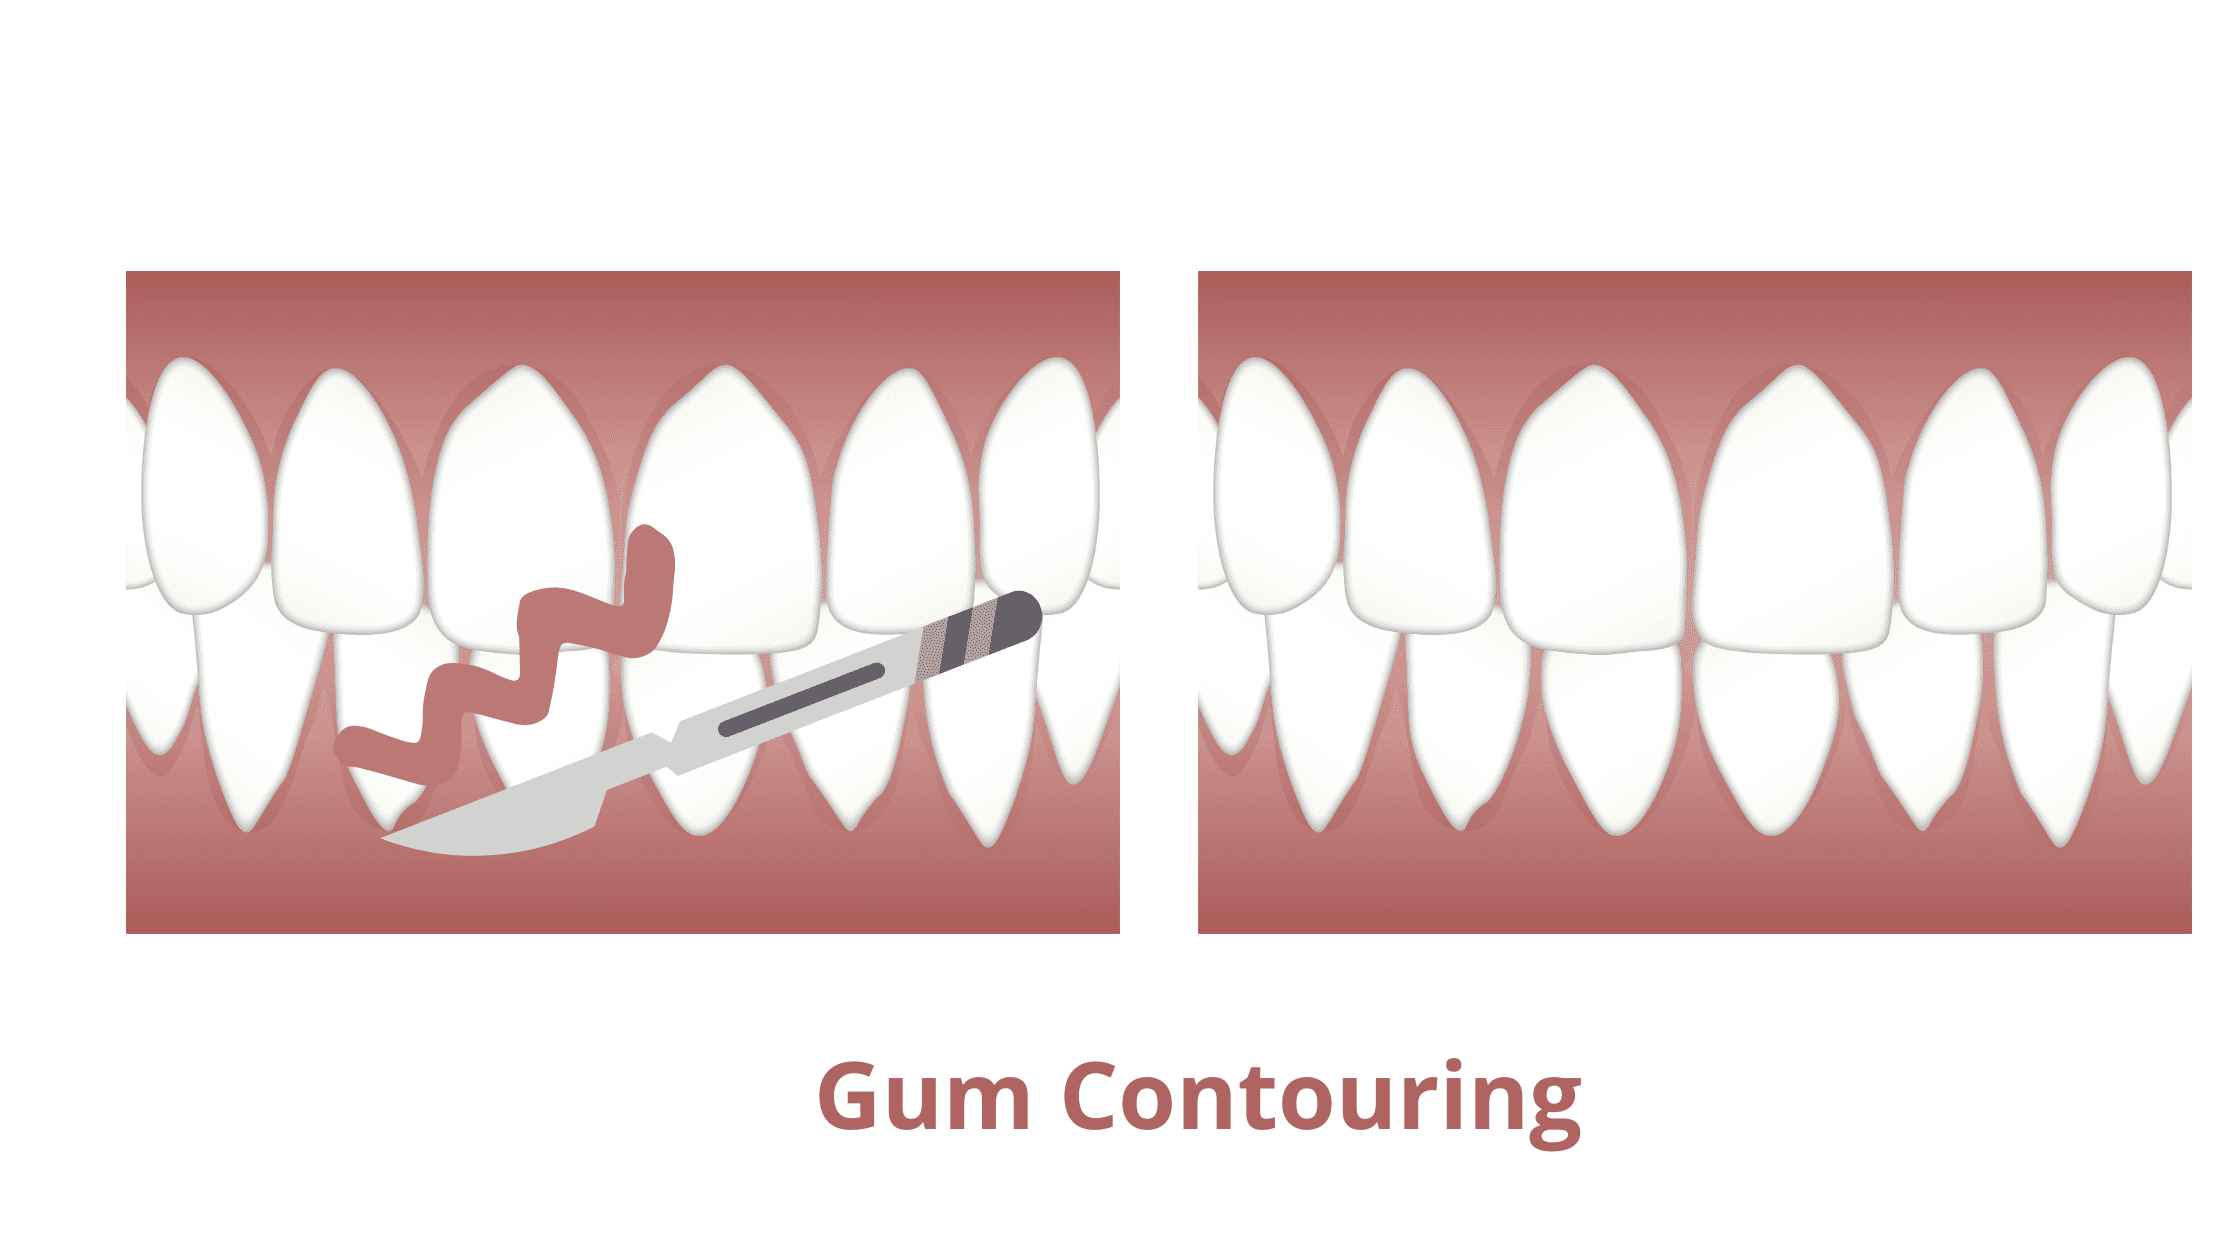 gingivoplasty or gum recontouring after gum graft surgery